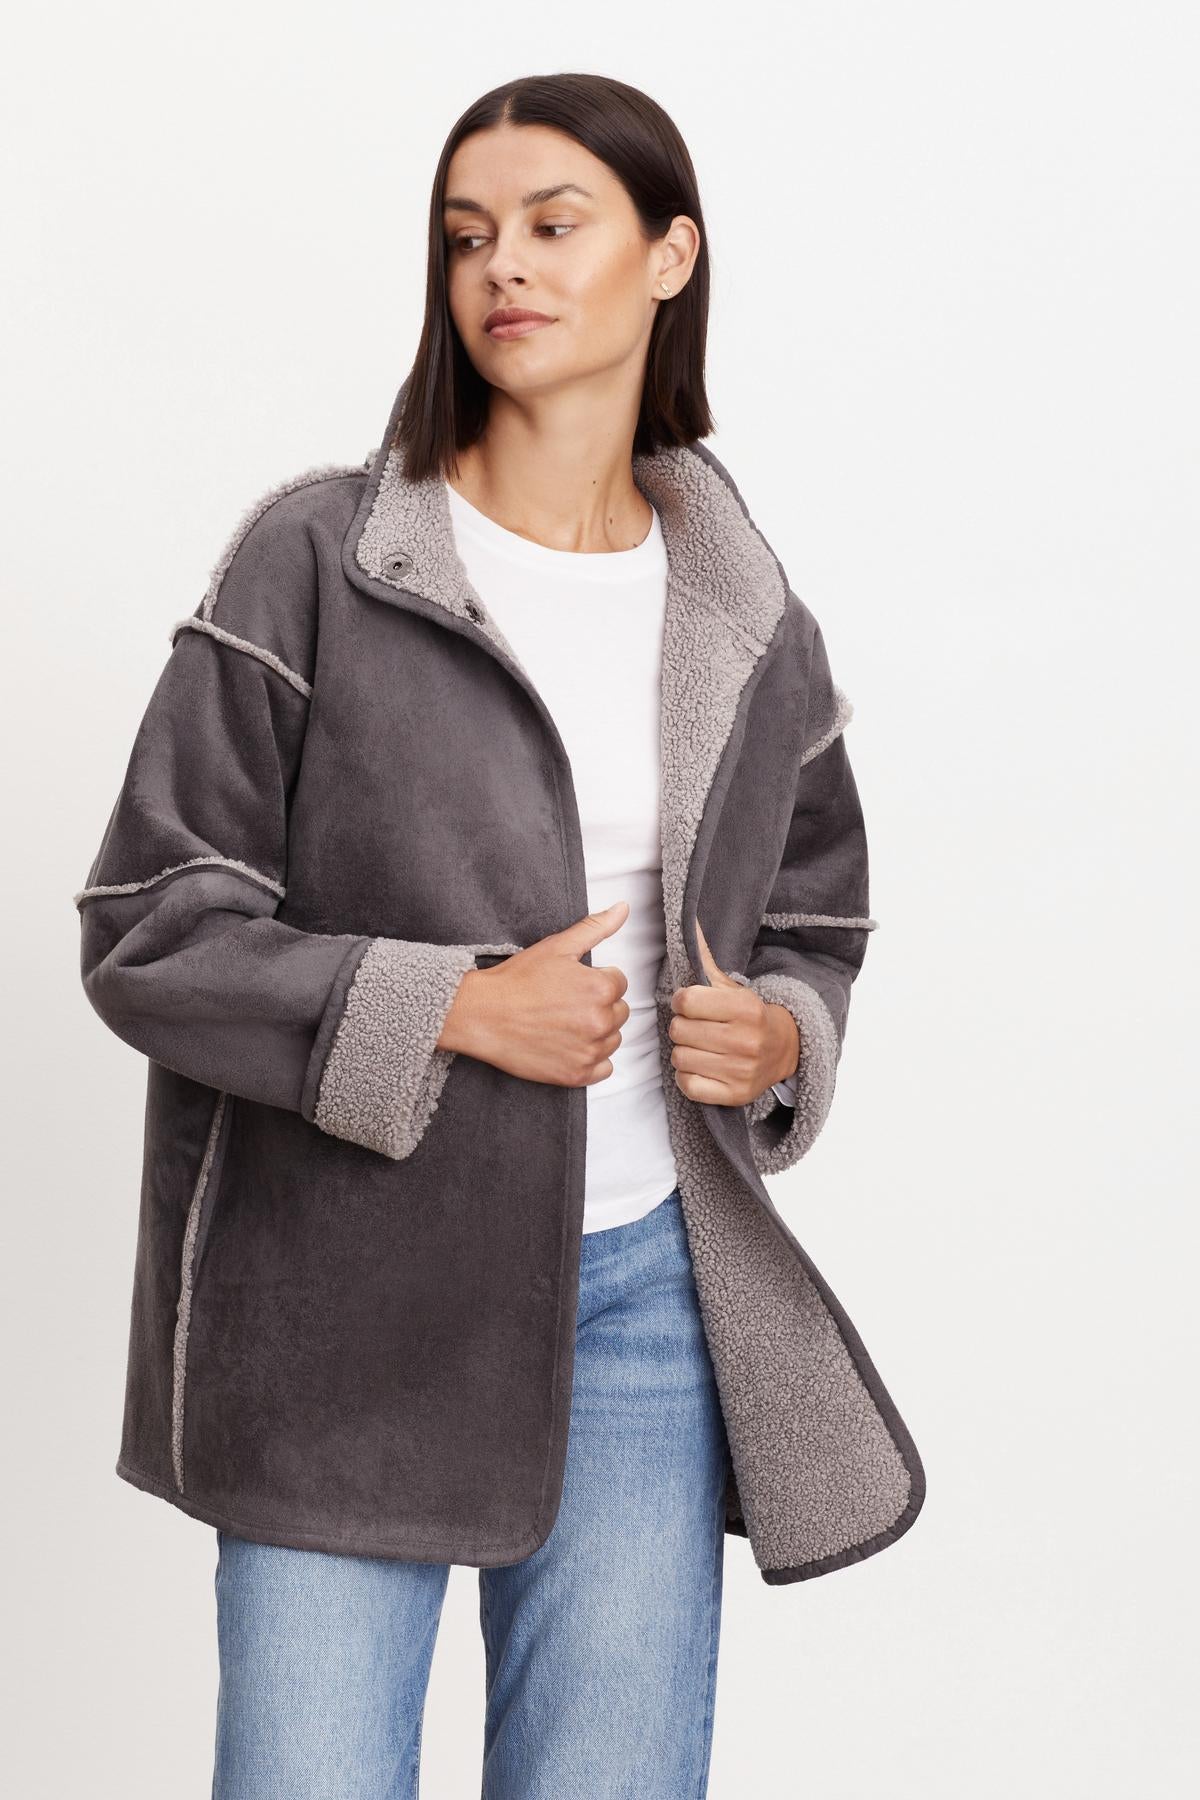   ALBANY LUX SHERPA REVERSIBLE JACKET 